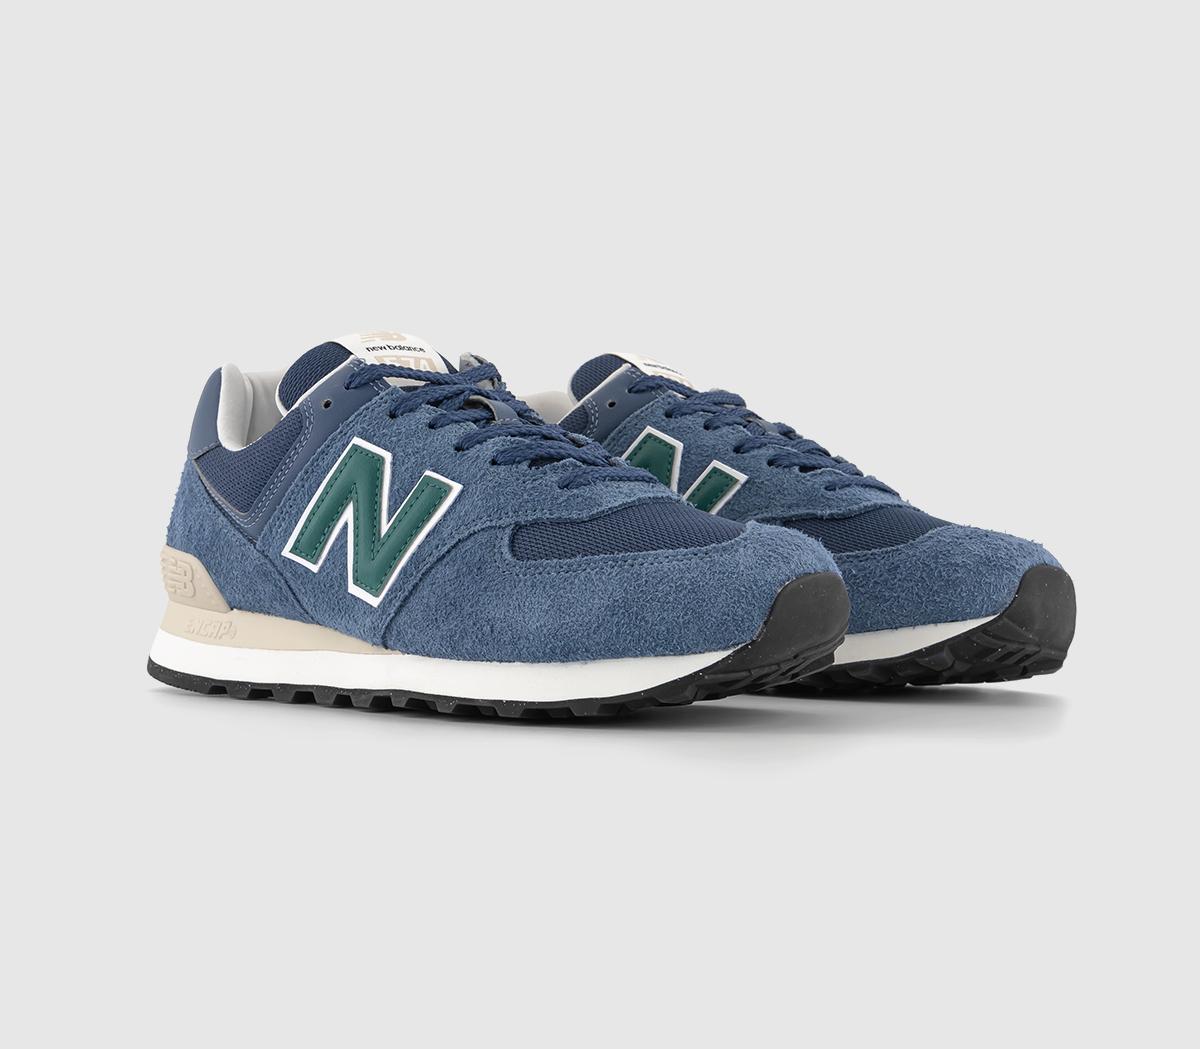 New Balance 574 Trainers Blue Navy Green, 8